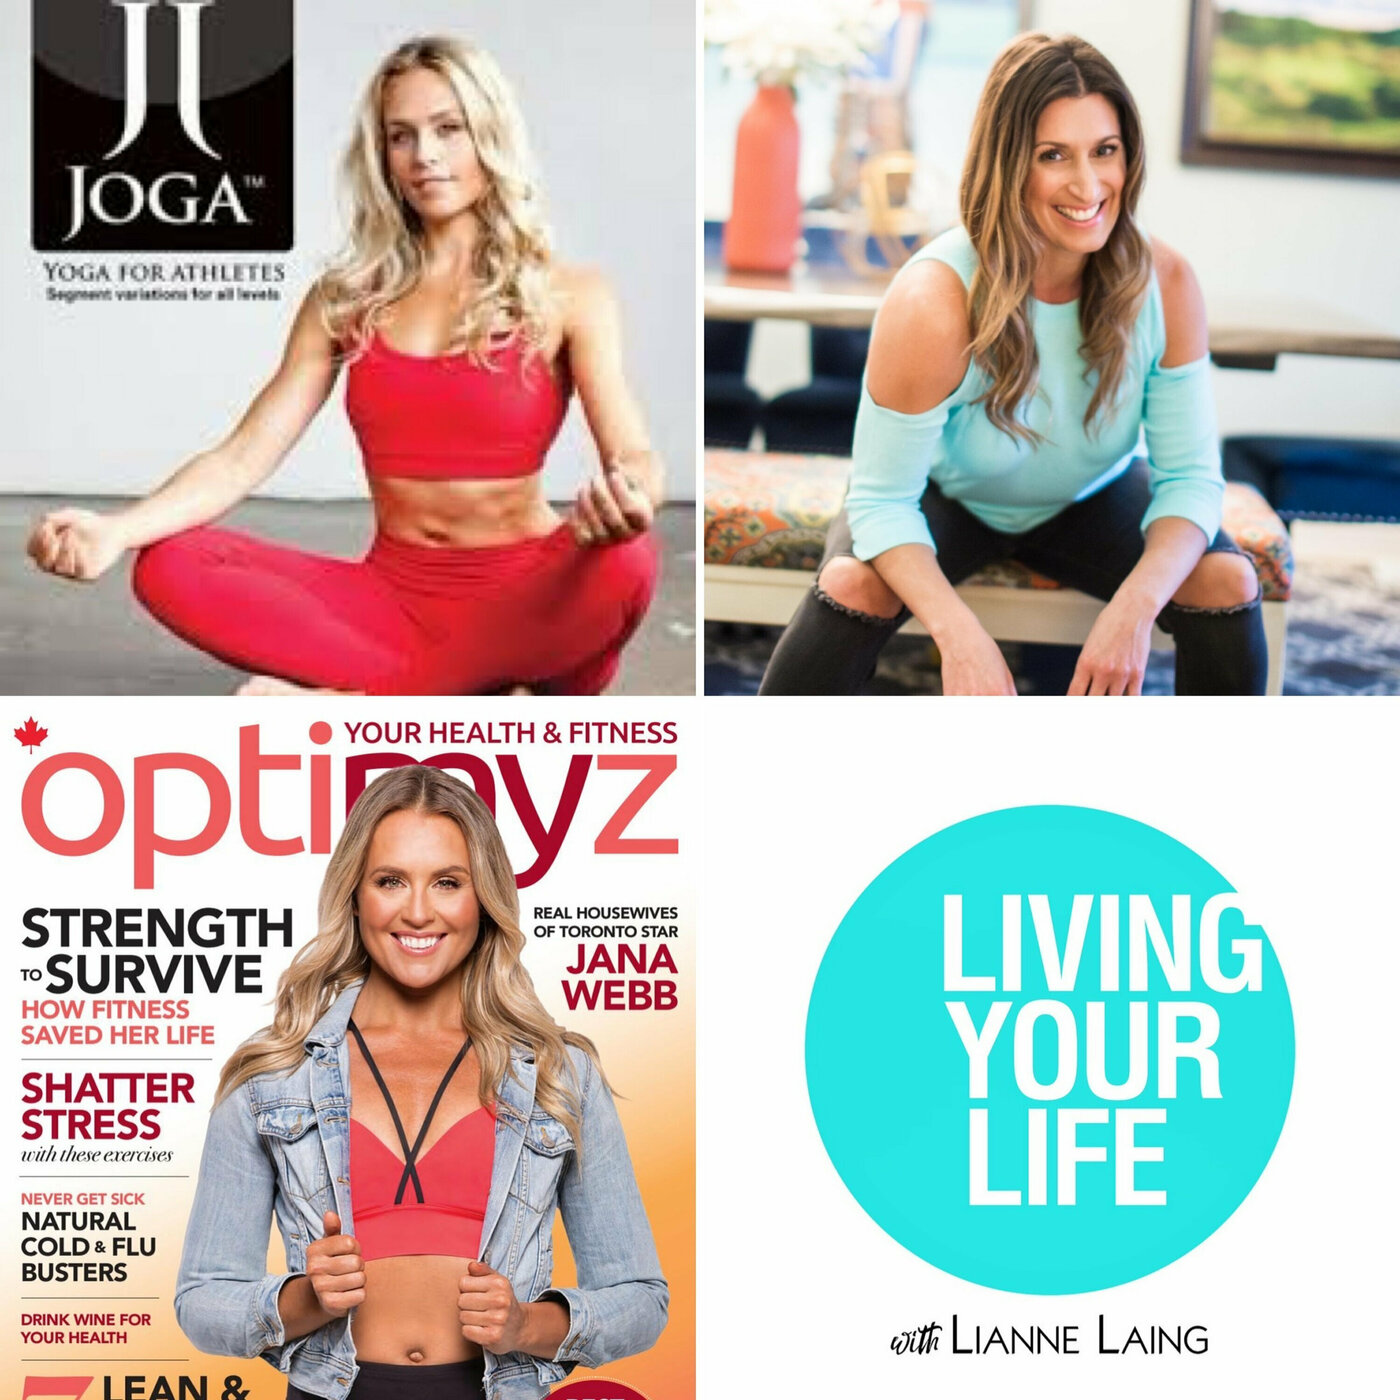 One Breath,  One Step At A Time; JOGA’s Jana Webb On Survival & Triumph